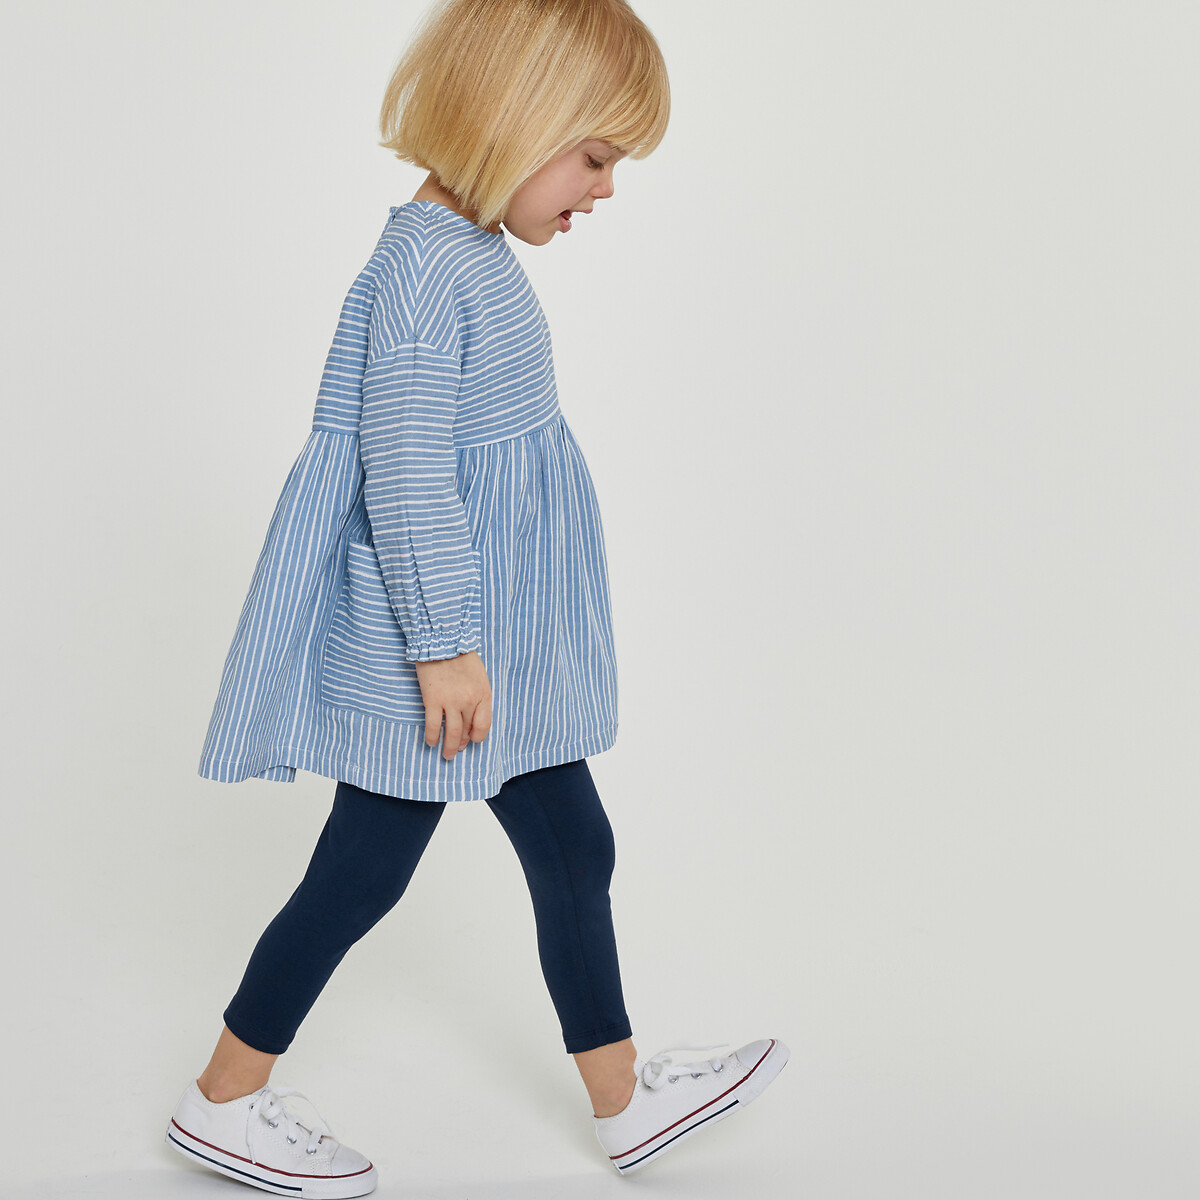 Ribbed cotton leggings/denim tunic dress outfit blue La Redoute Collections